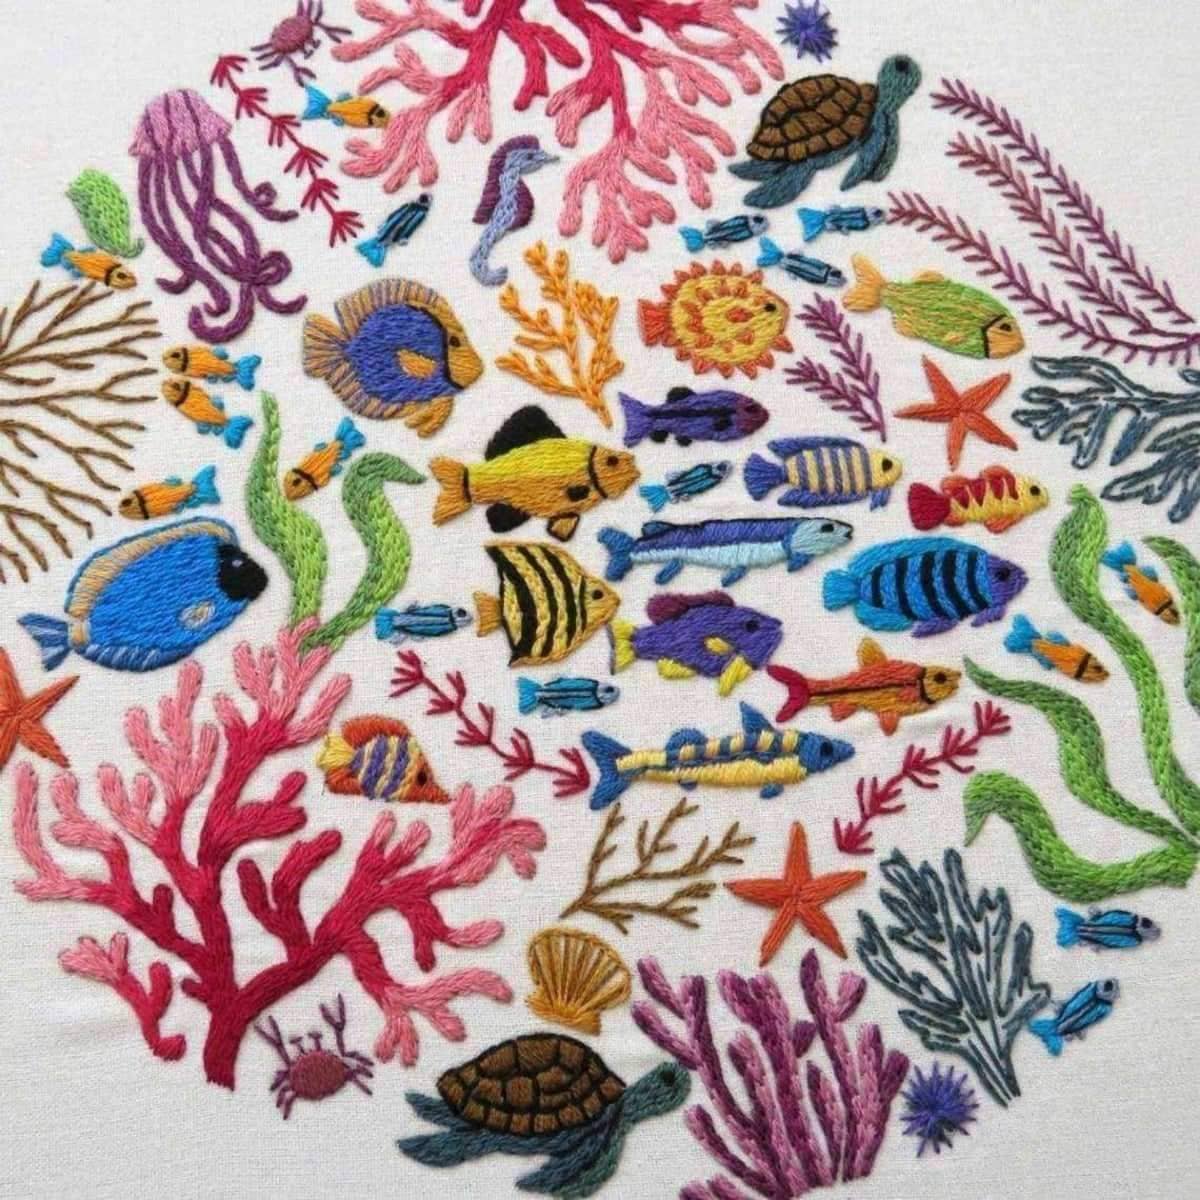 Ocean Wonders, Hand Embroidery Kit , Embroidery Kit , StitchDoodles , Embroidery, embroidery hoop kit, Embroidery Kit, embroidery kit for adults, embroidery kit for beginers, hand embroidery, hand embroidery kit, hand stitching, nurge square hoops, PDF pattern , StitchDoodles , shop.stitchdoodles.com